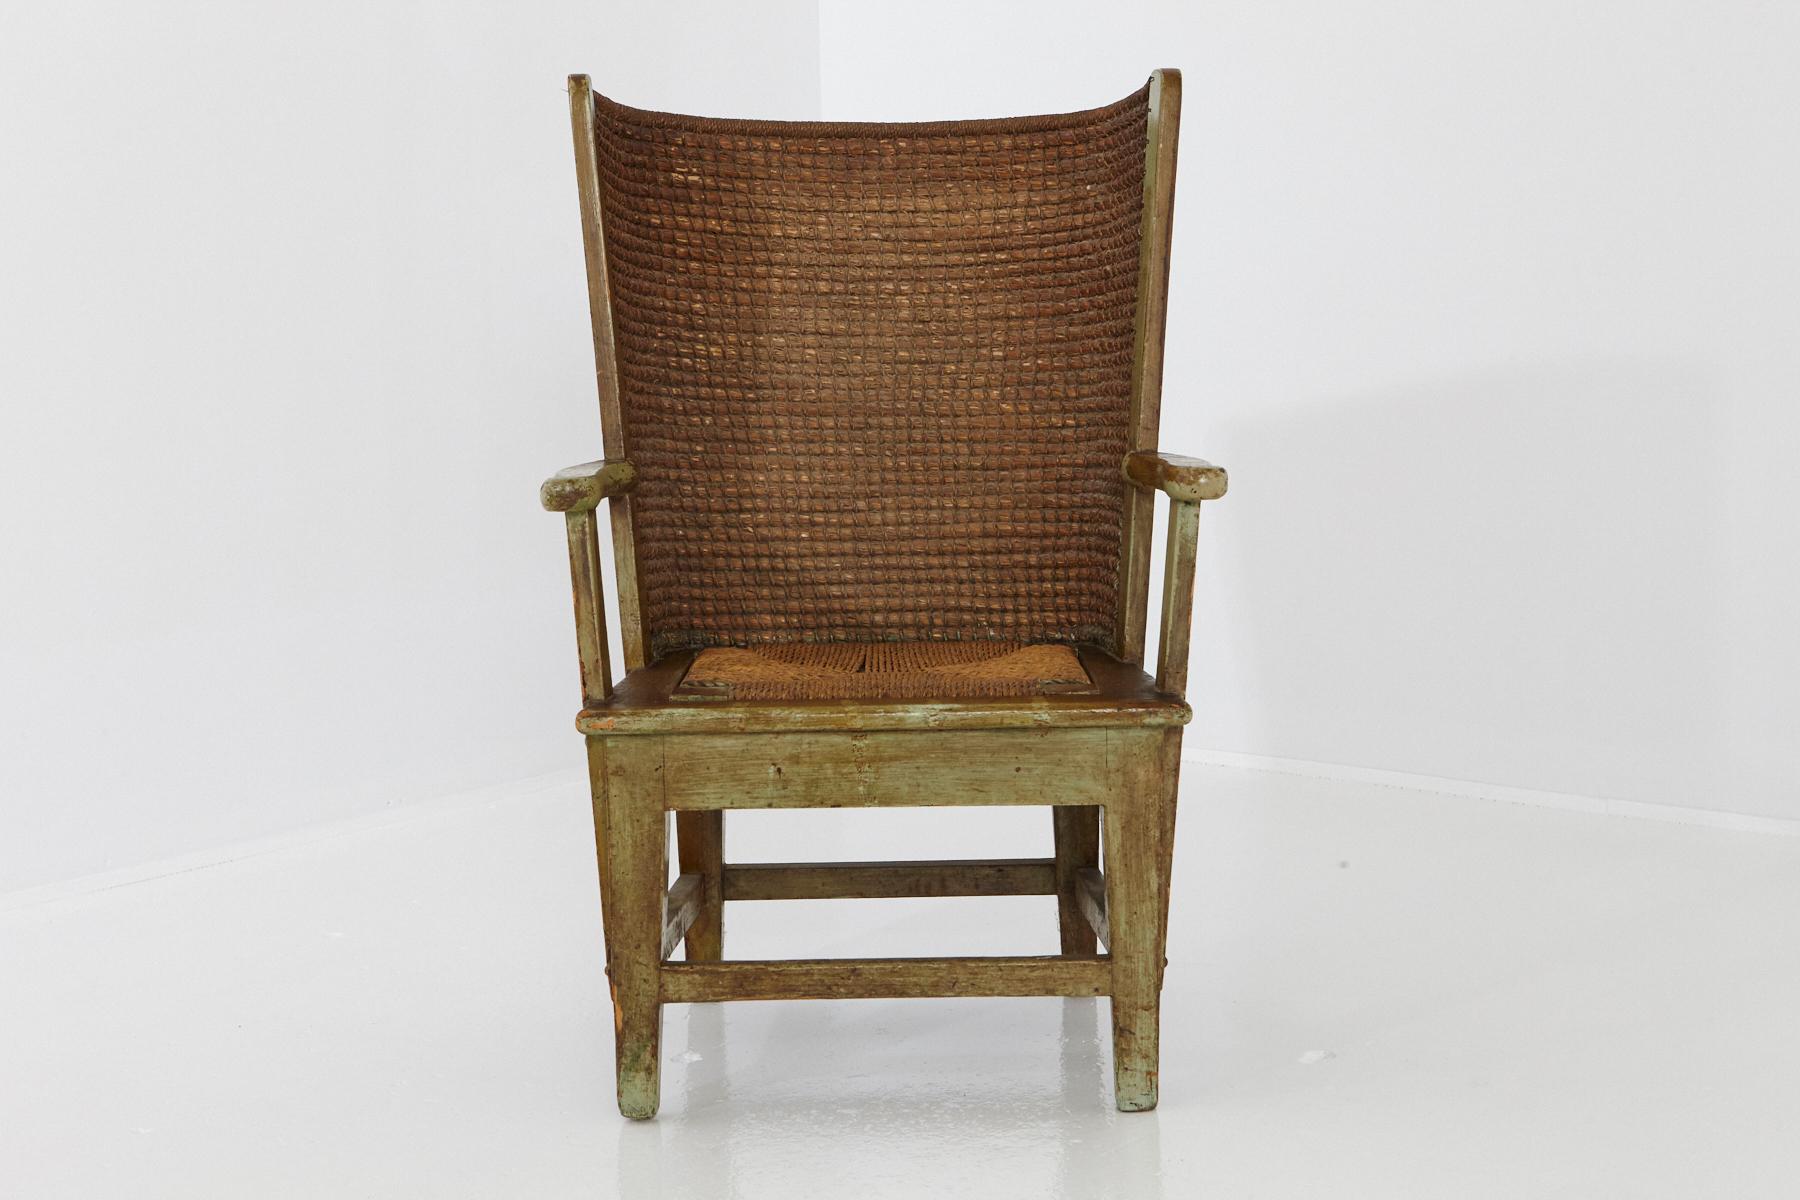 Late 19th-century child's armchair or fauteuil from the Scottish Orkney Islands, also referred to as Orkney Chair.
The Orkney chair features an oak frame supporting a demicircle back in the style of wingback chairs, handwoven with straw. 
The